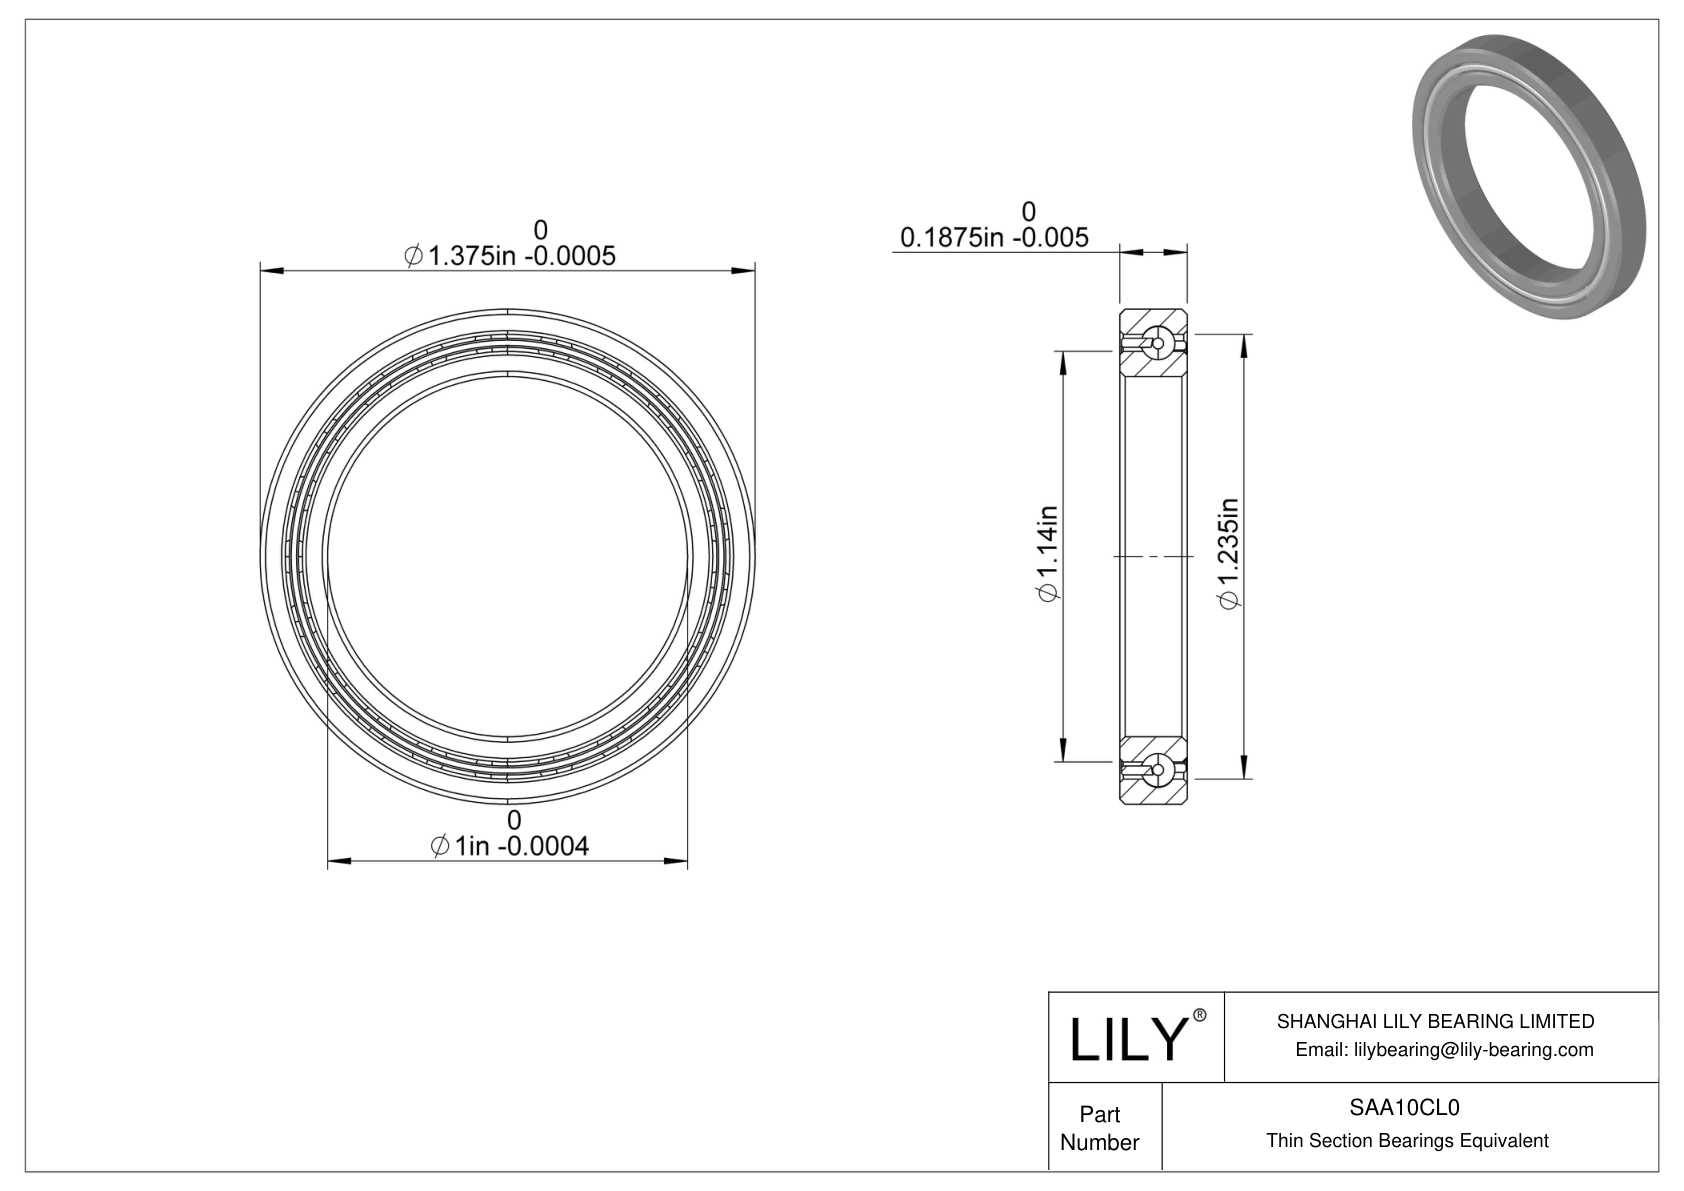 SAA10CL0 Constant Section (CS) Bearings cad drawing